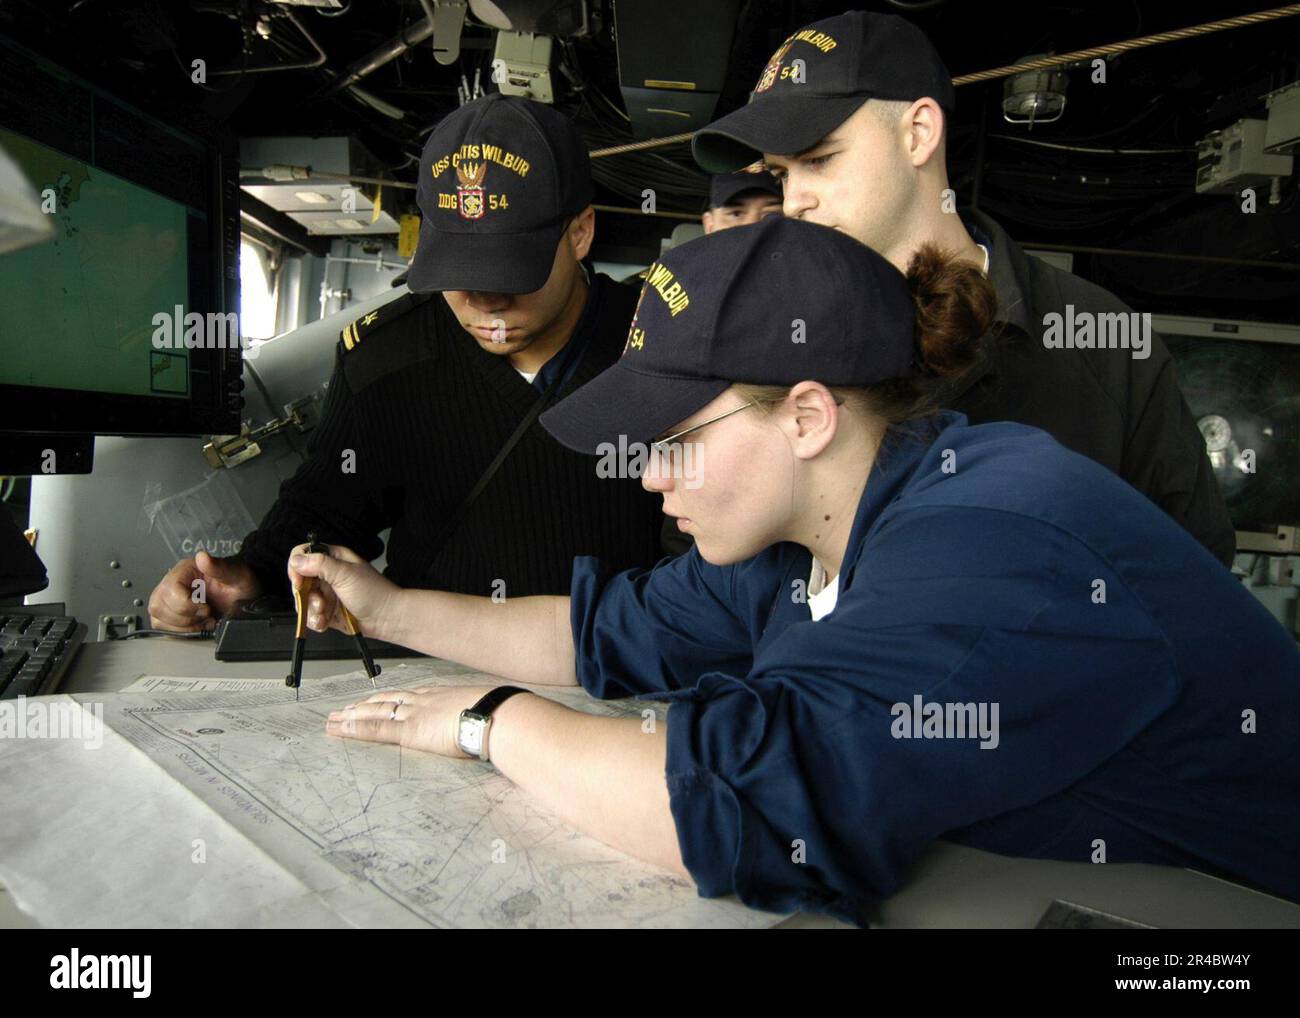 US Navy  Lt. j.g. and Quartermaster Seaman observe the training being held by Quartermaster 2nd Class Rachael H. Hairston as she updates the navigation charts. Stock Photo